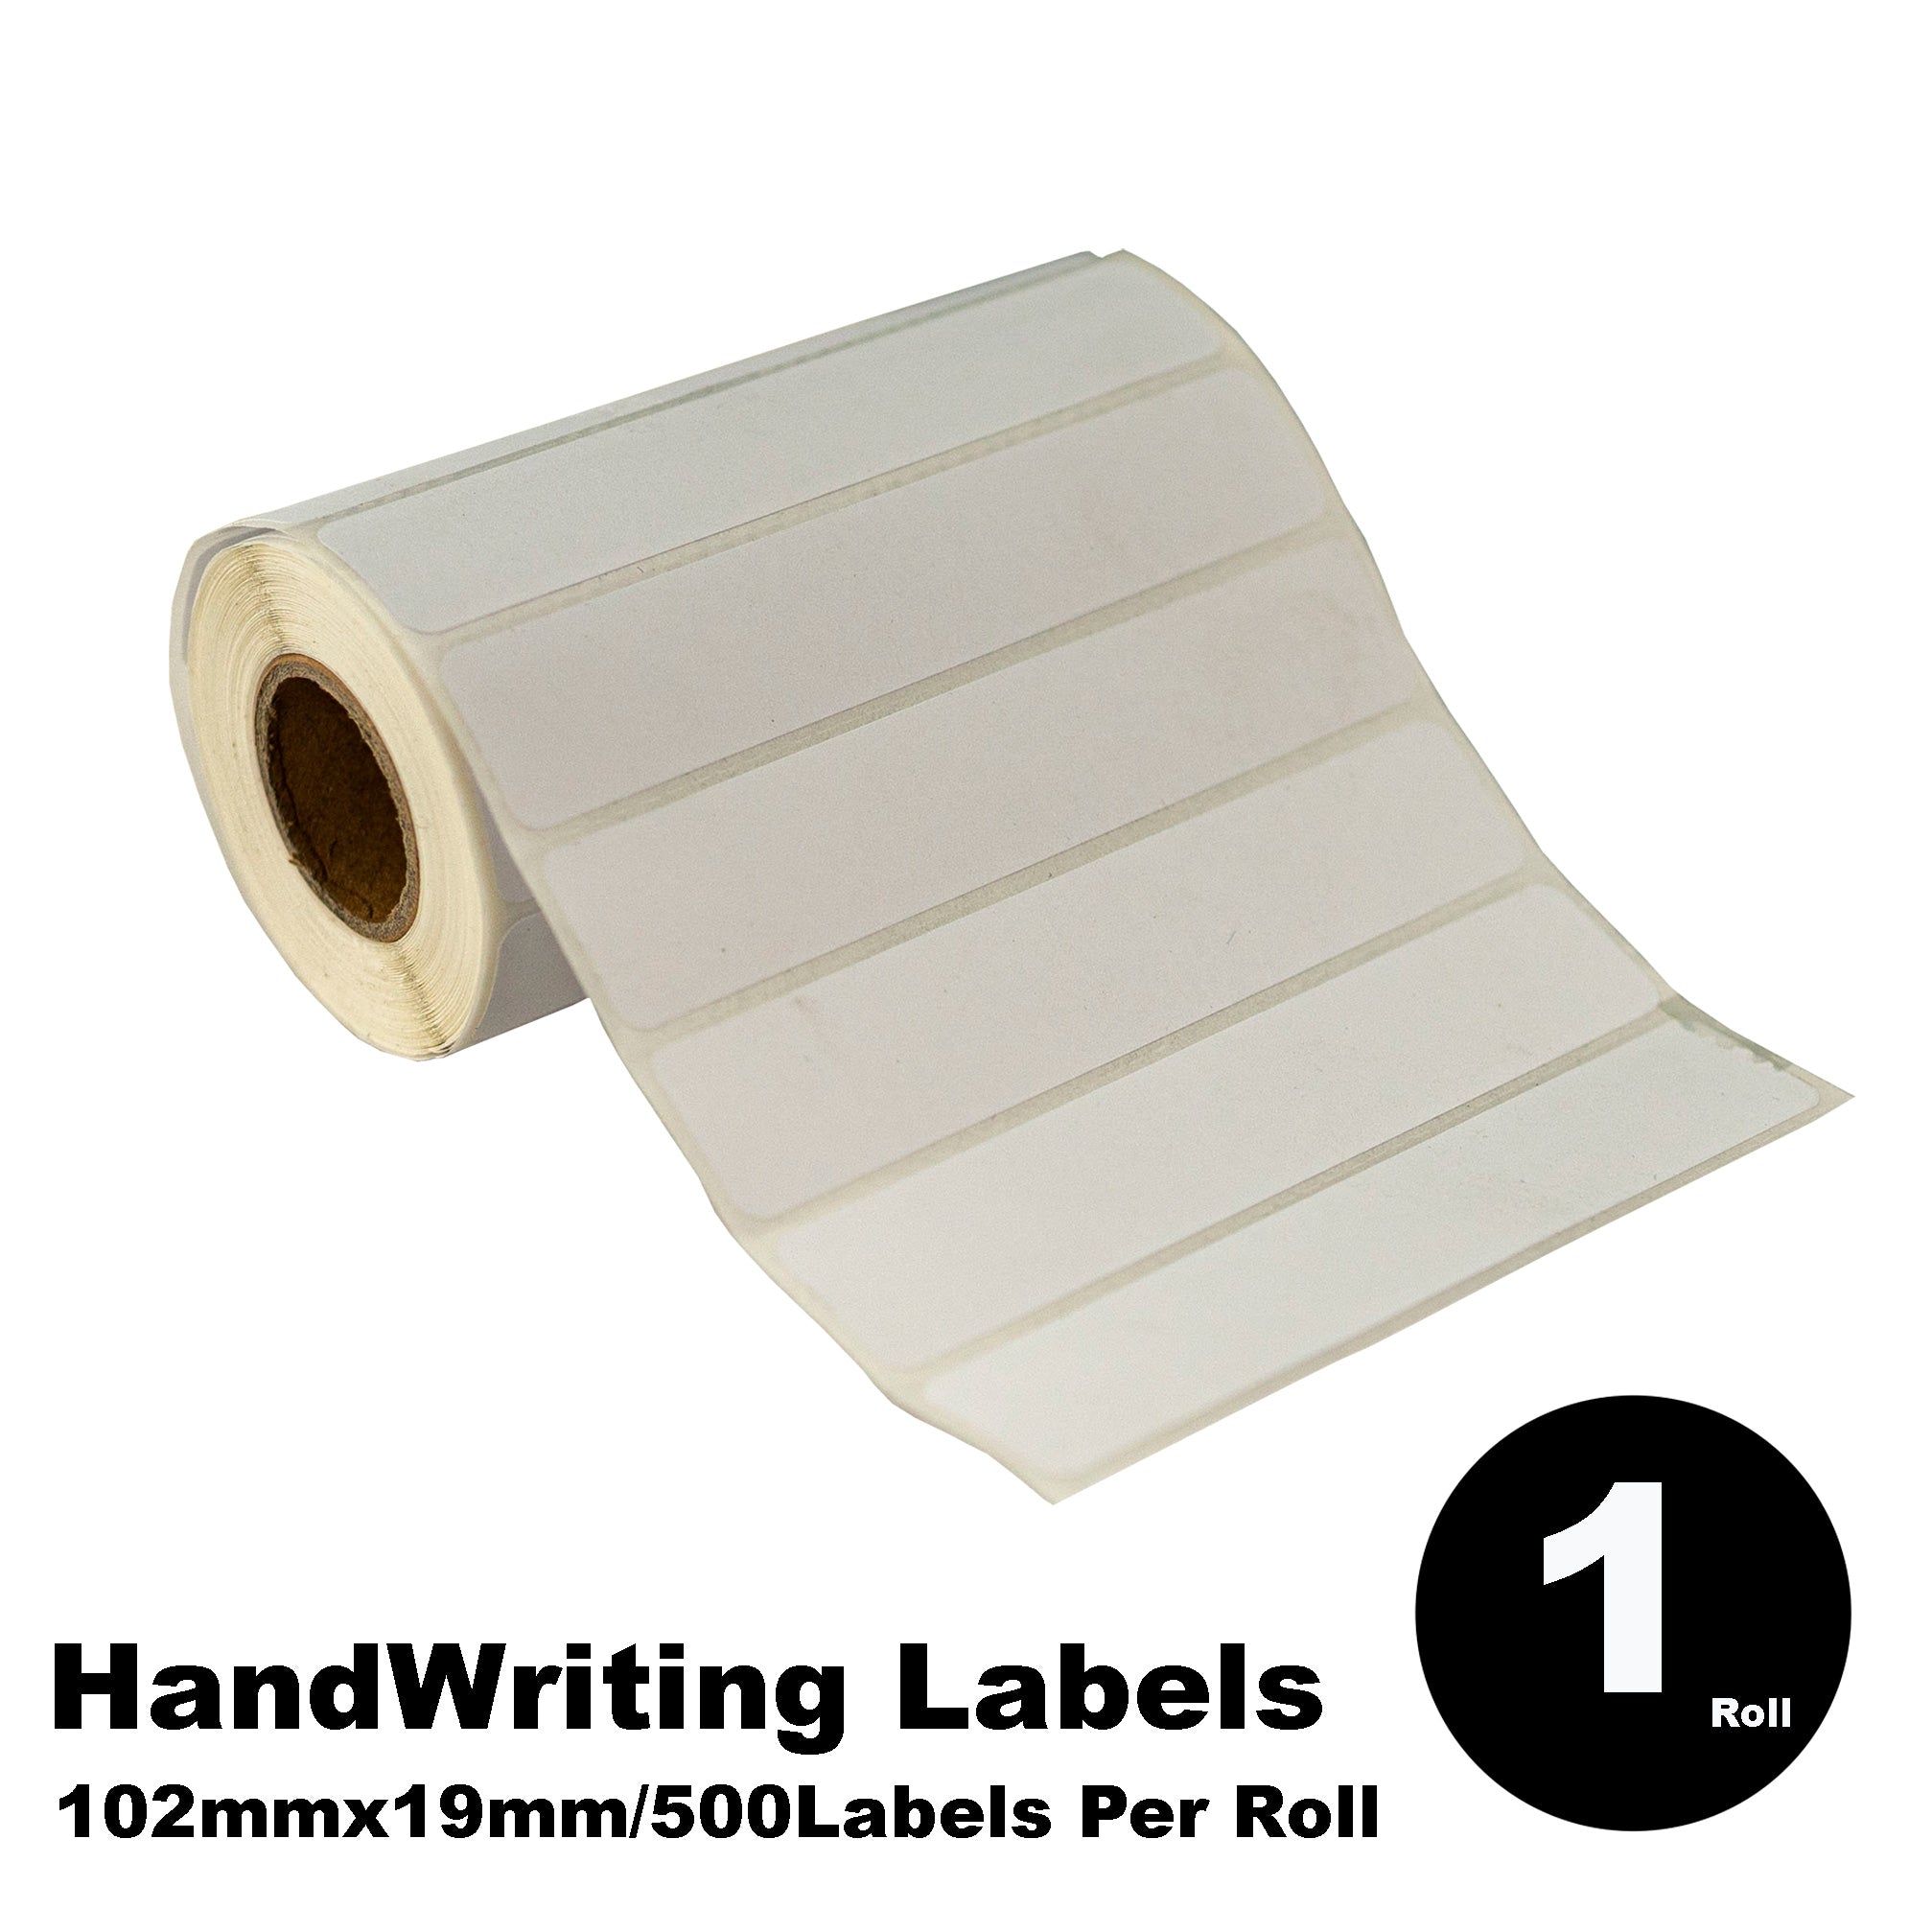 Hand Writing White Labels 102mm x 19mm 500 Labels Per Roll